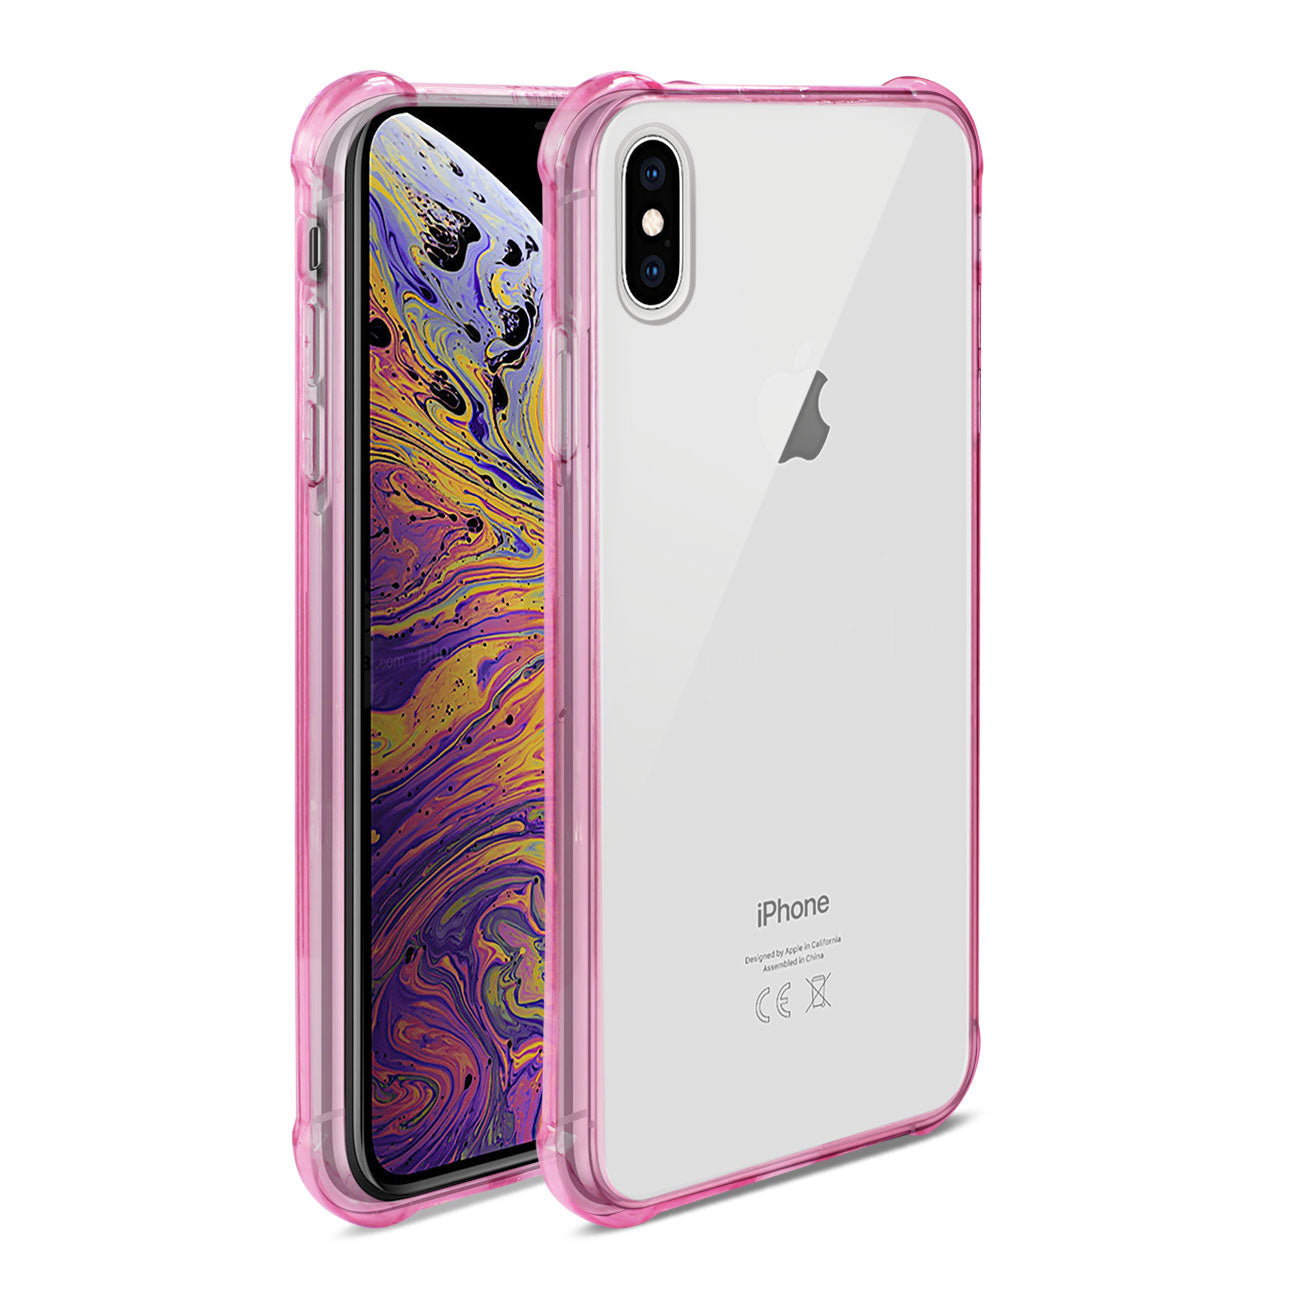 iPhone XS Max Clear Bumper Case With Air Cushion Protection In Clear Hot Pink